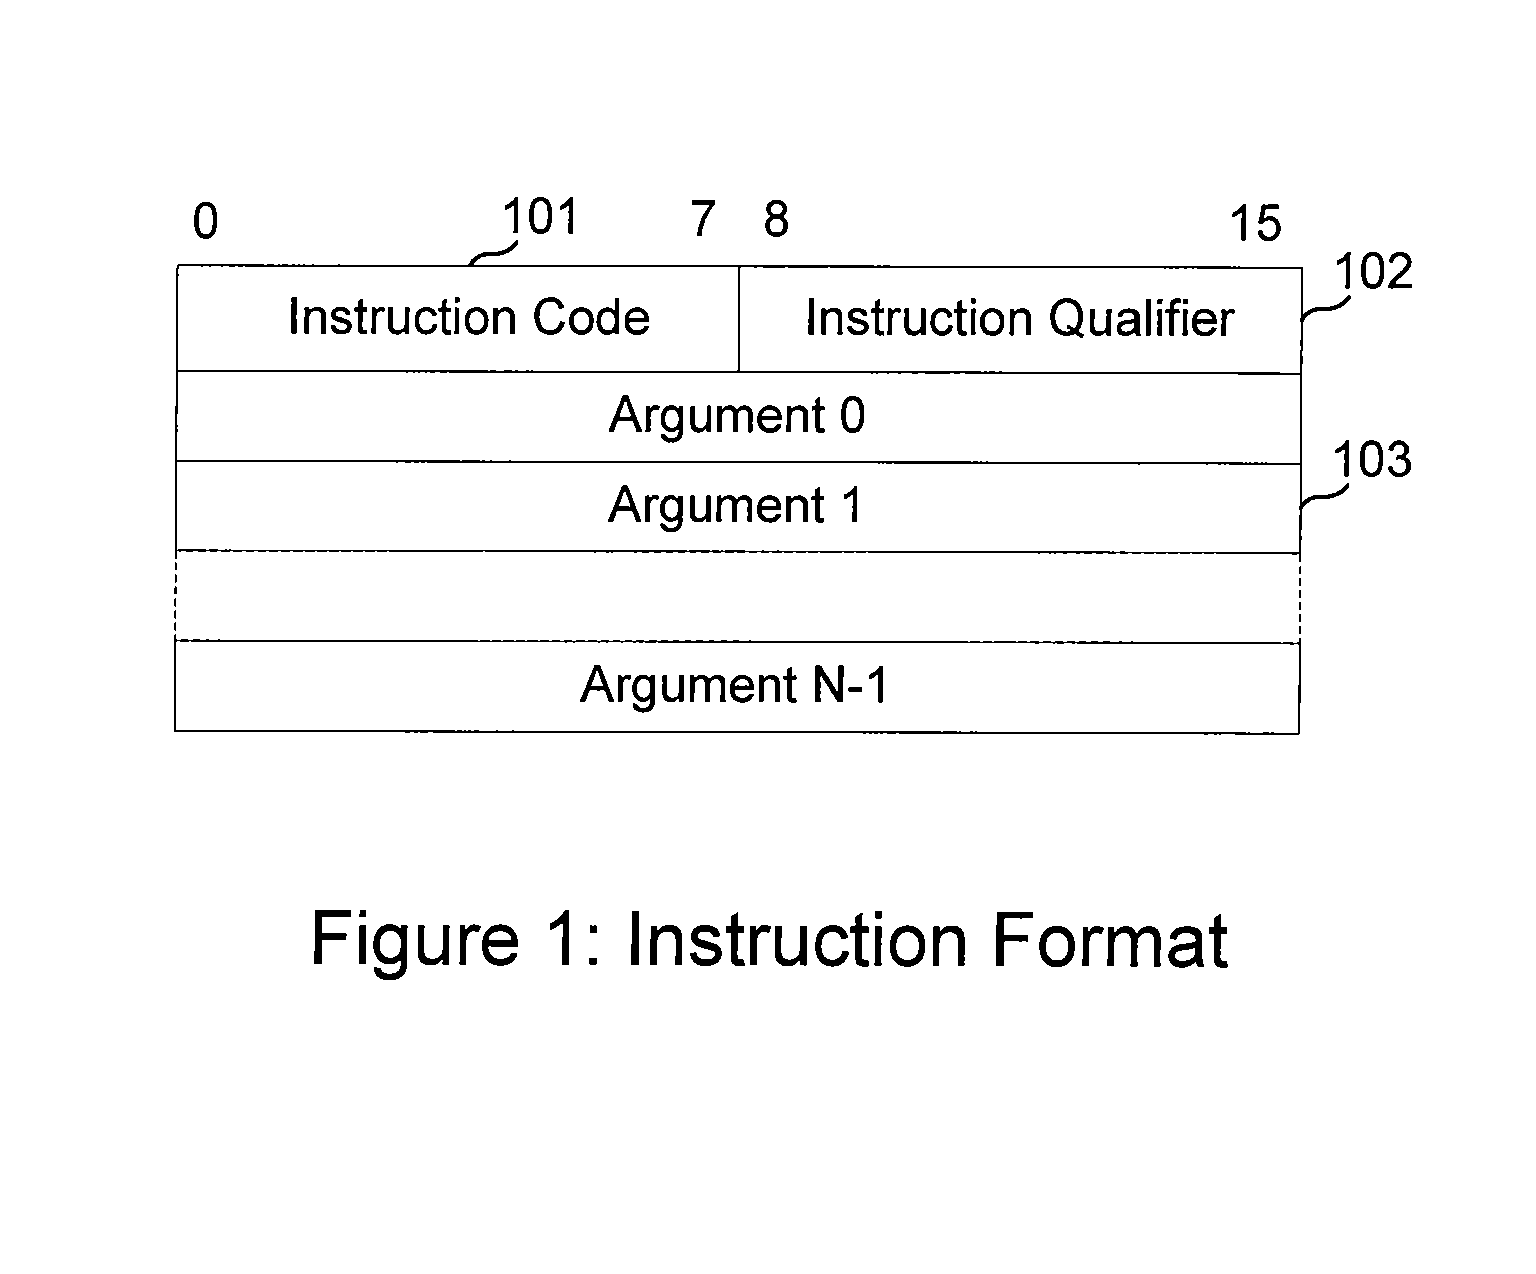 Efficient Encoding and Decoding Methods for Representing Schedules and Processing Forward Error Correction Codes